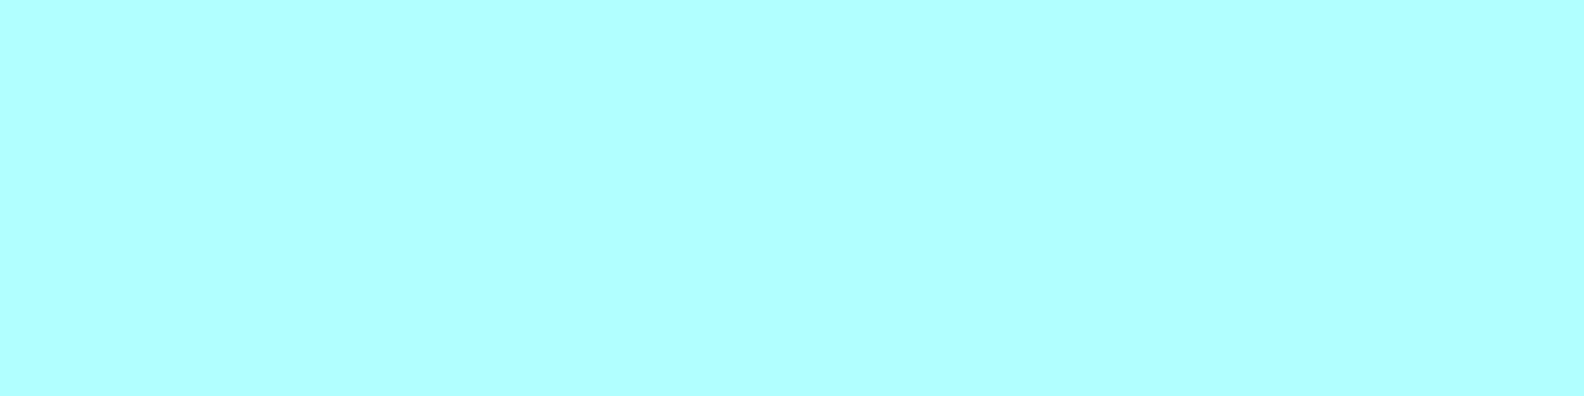 1584x396 Italian Sky Blue Solid Color Background